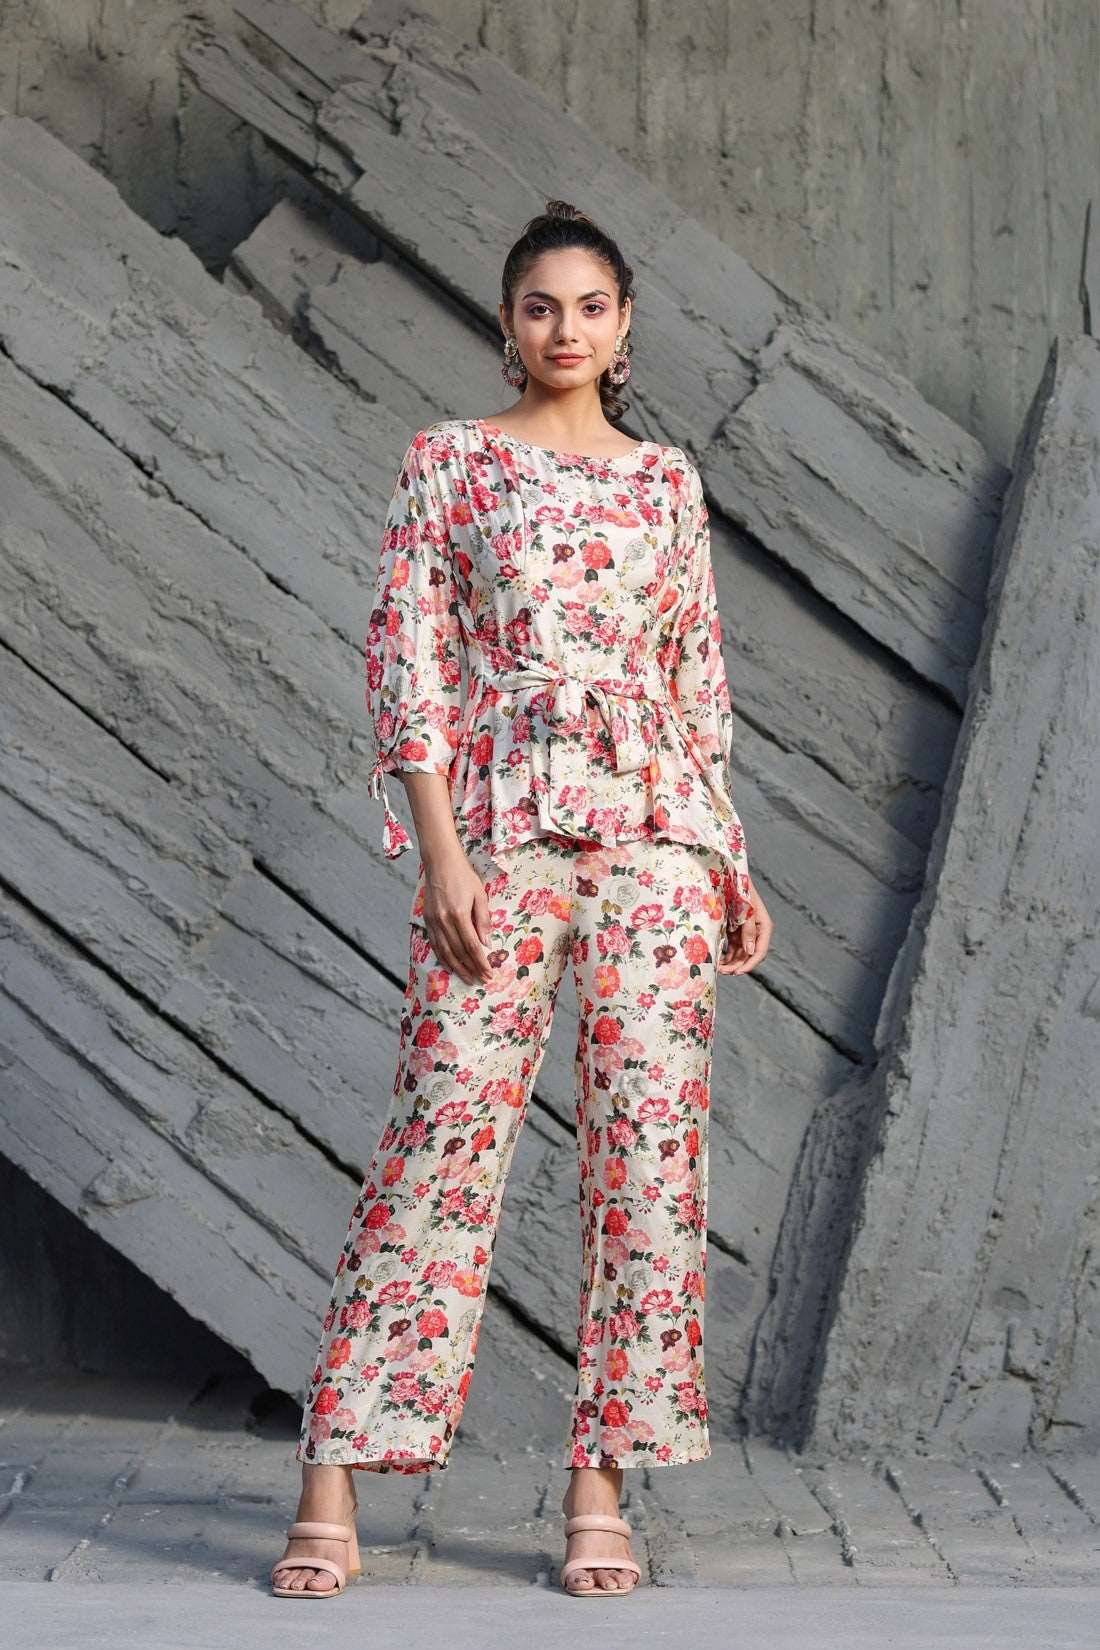 The model in the image is wearing Floral Printed Cotton Coordinate Sets Womens from Alice Milan. Crafted with the finest materials and impeccable attention to detail, the Co-ord Set looks premium, trendy, luxurious and offers unparalleled comfort. It’s a perfect clothing option for loungewear, resort wear, party wear or for an airport look. The woman in the image looks happy, and confident with her style statement putting a happy smile on her face.